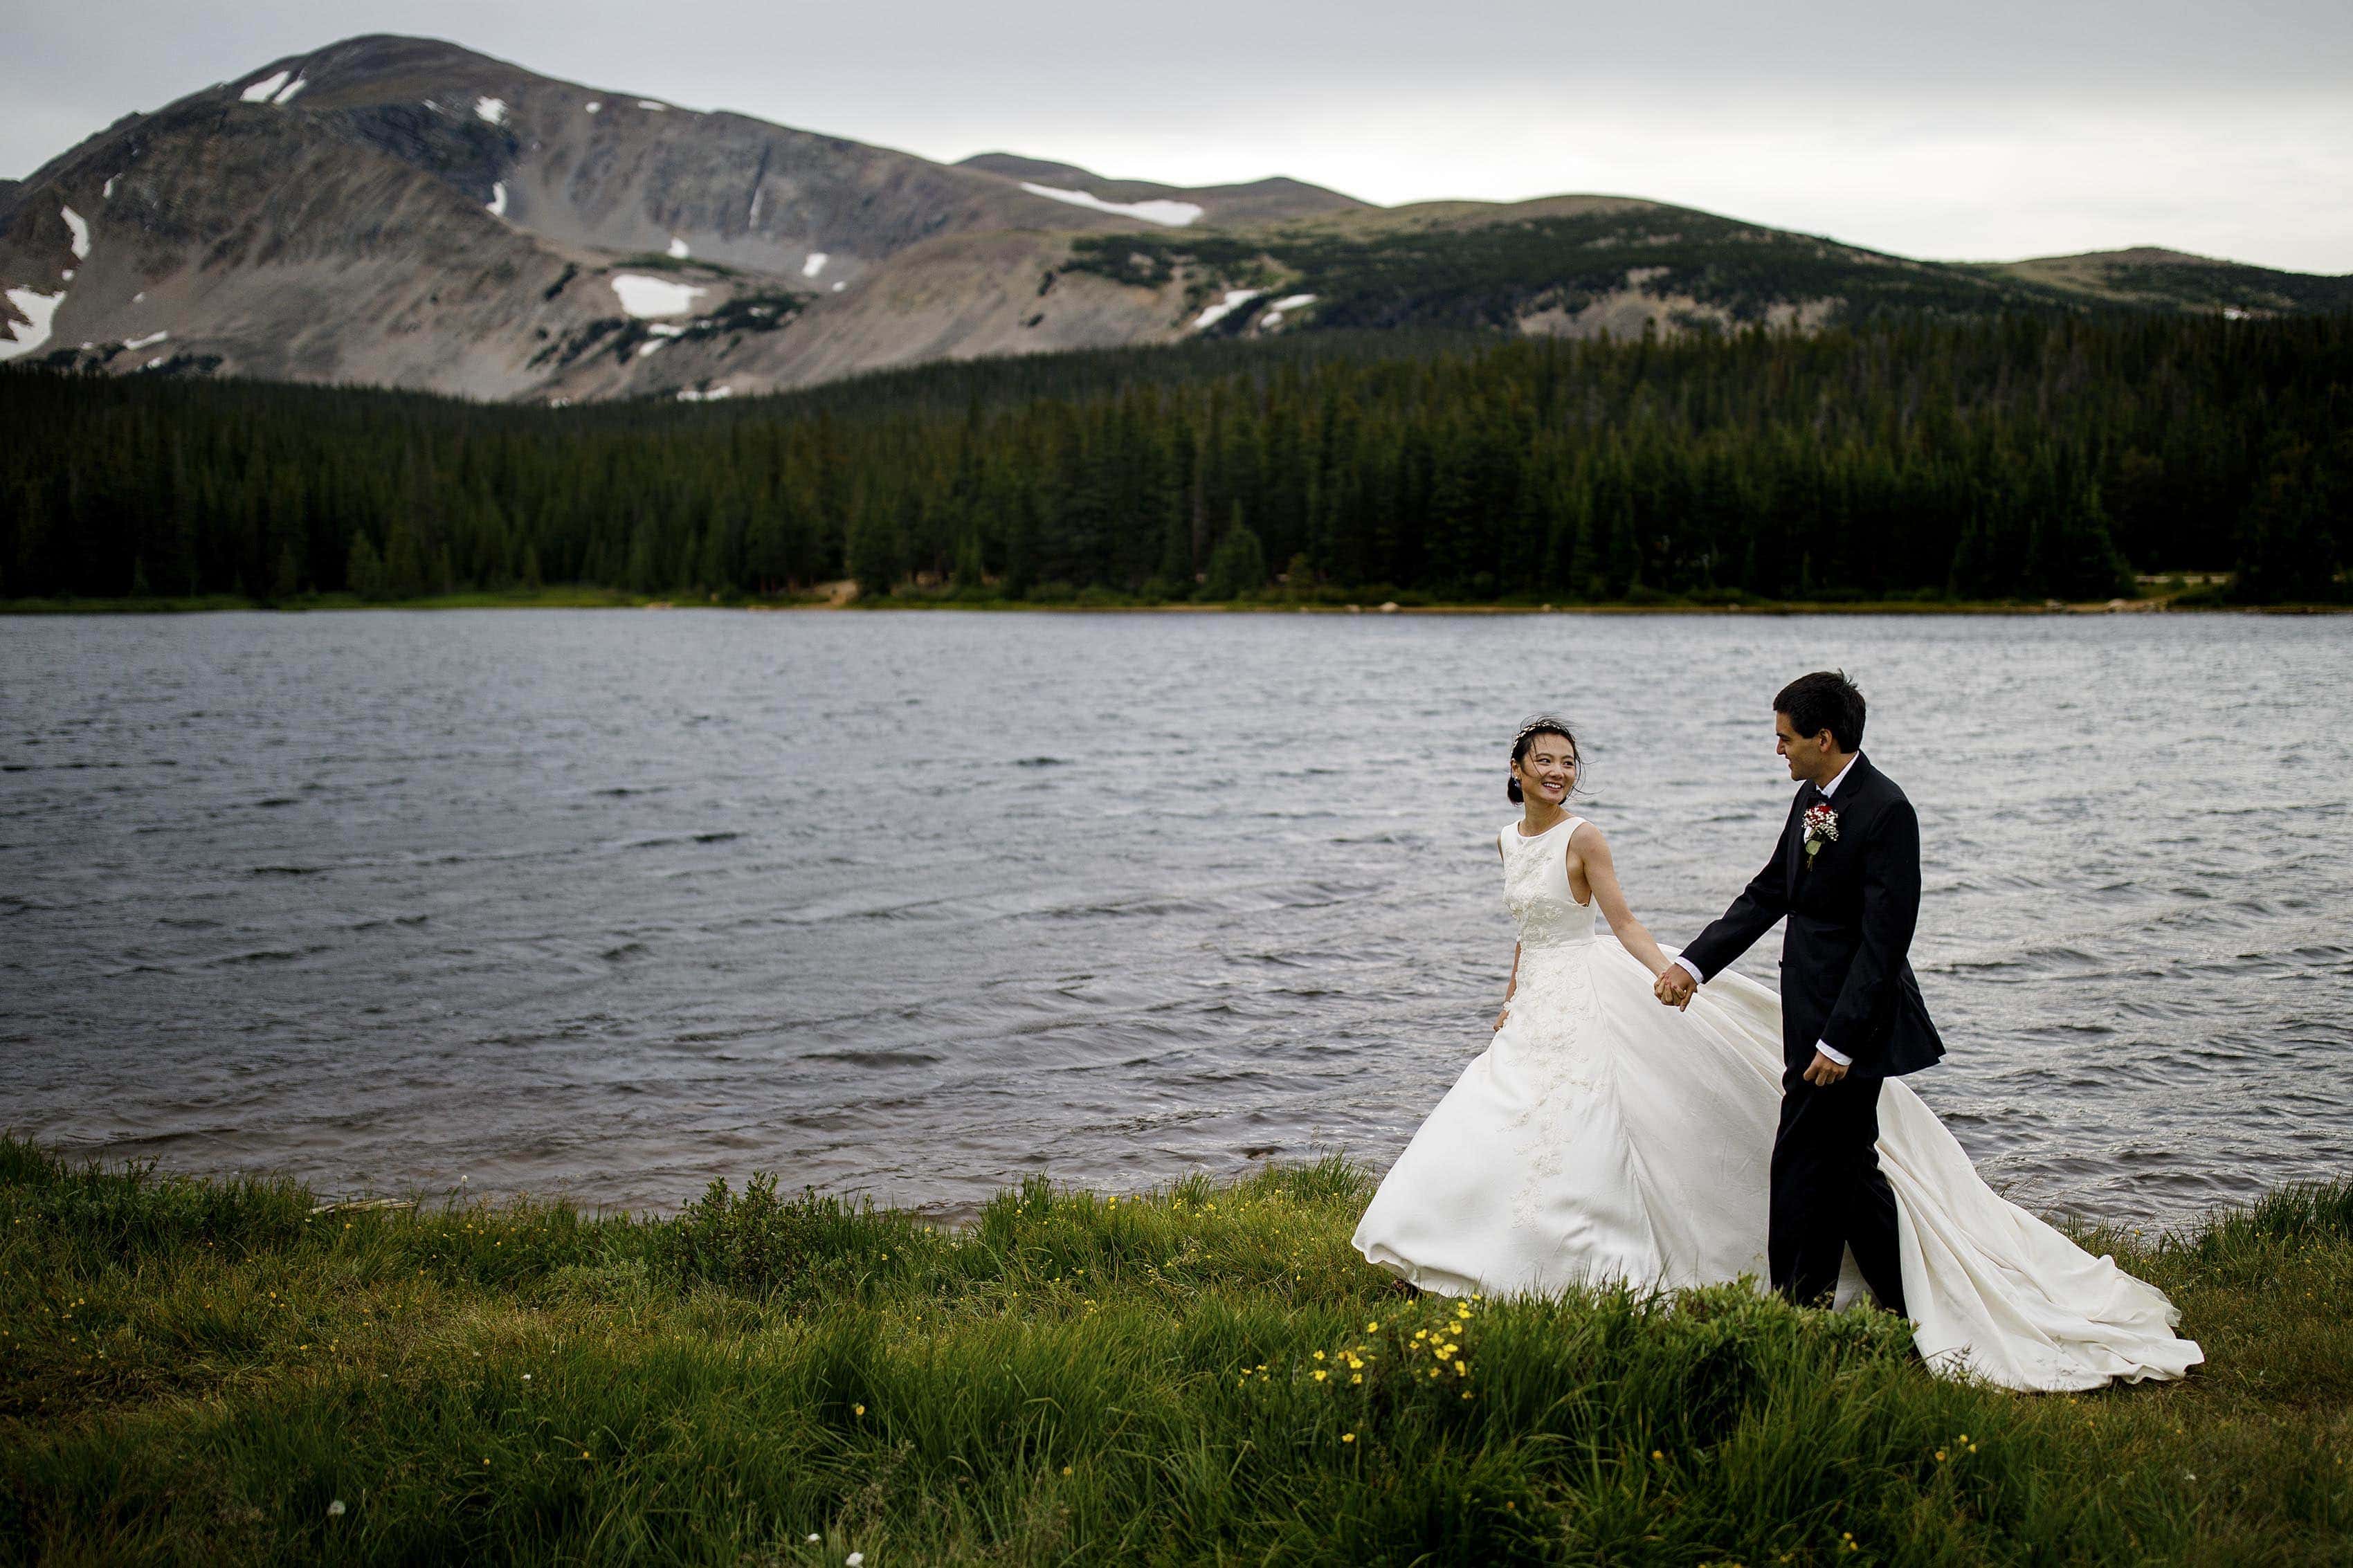 Cecelia walks with Jamie along the shore of Brainard Lake in Ward, CO during their elopement